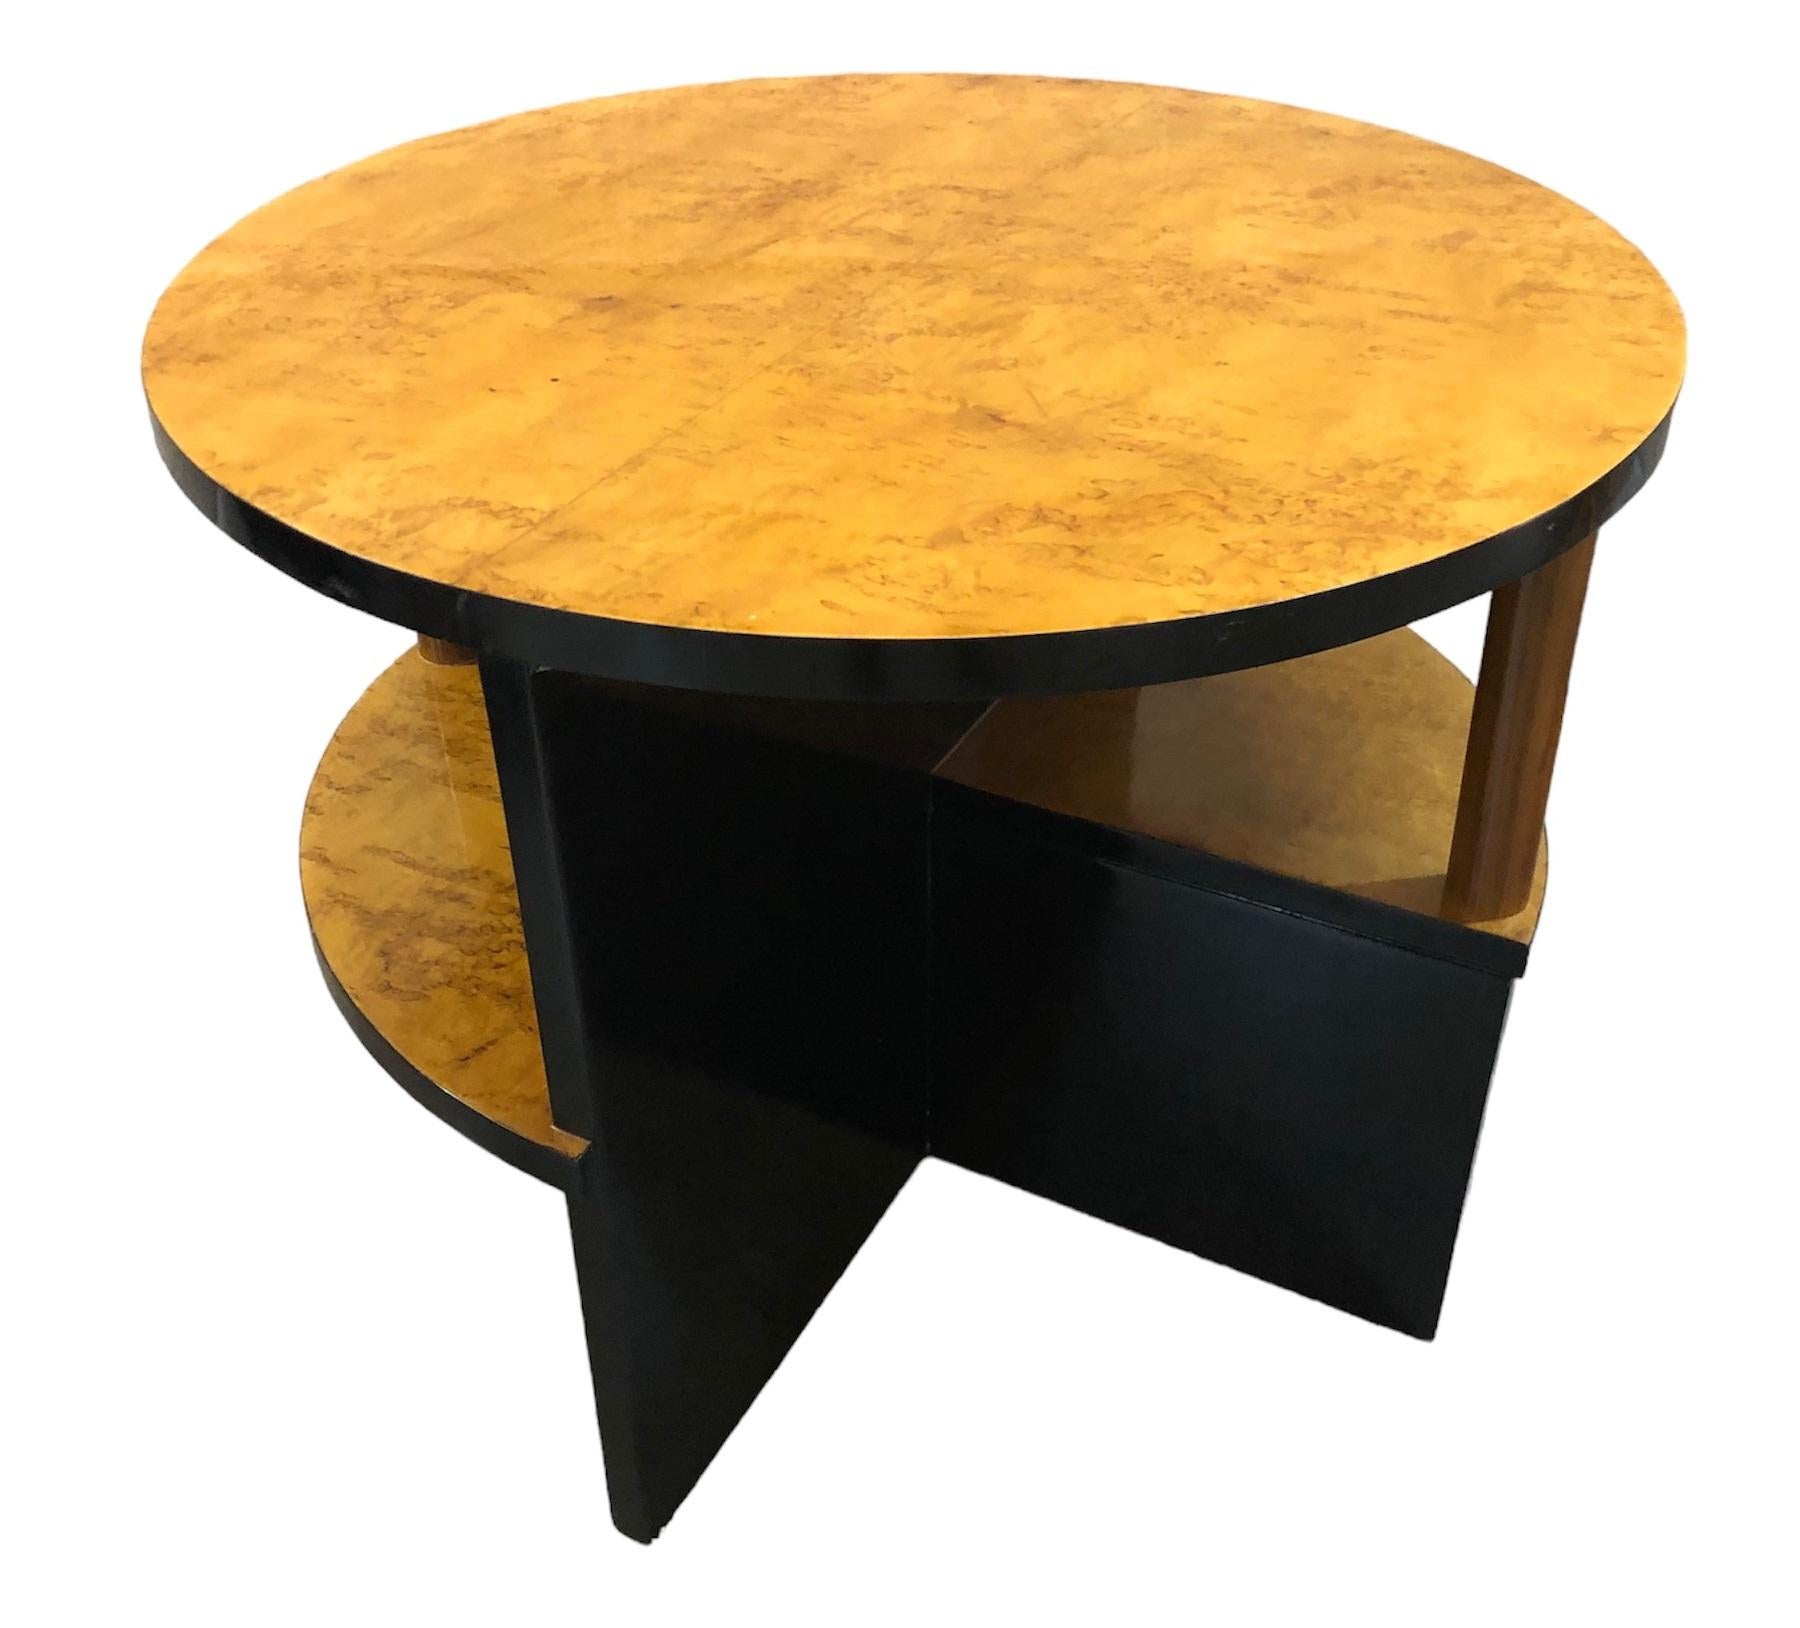 Amaizing Art Deco, 2 Tables in Wood, France, 1930 For Sale 14